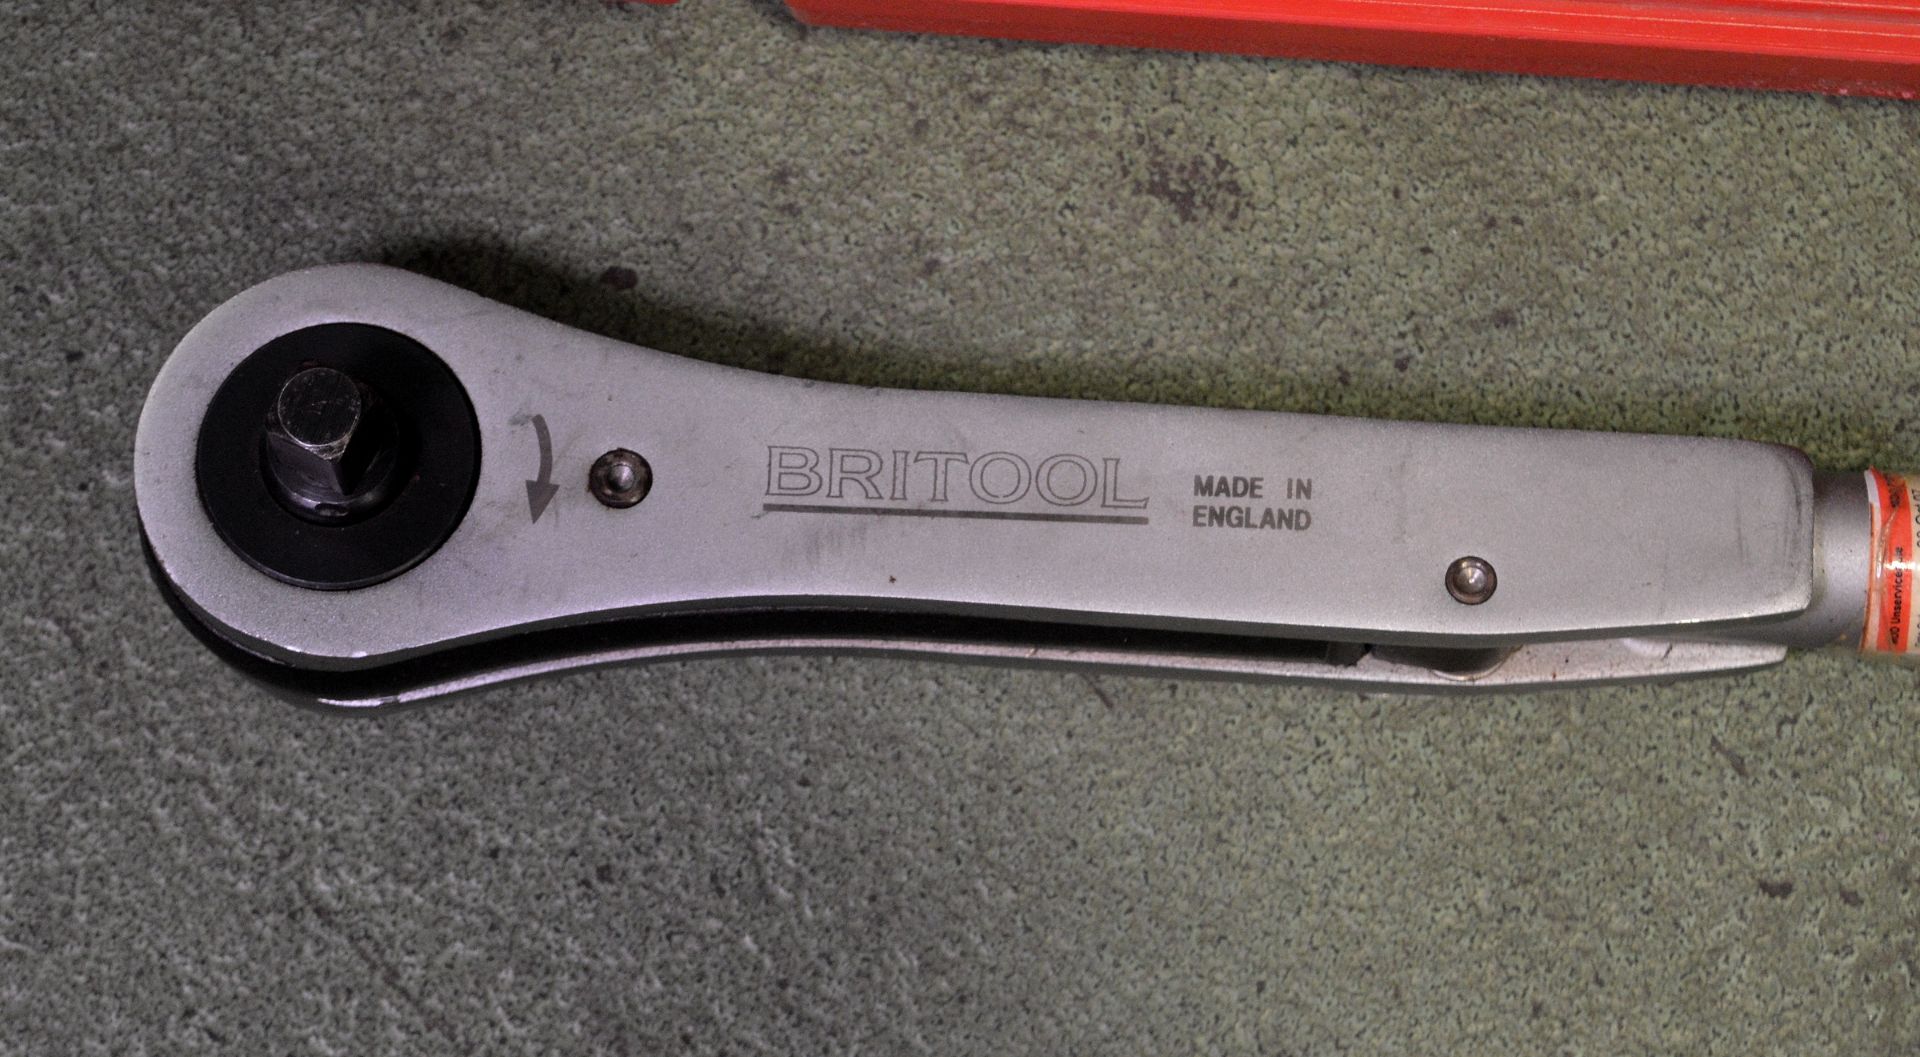 Britool EVTR 3000 Torque Wrench 50-250LB FT - Image 2 of 2